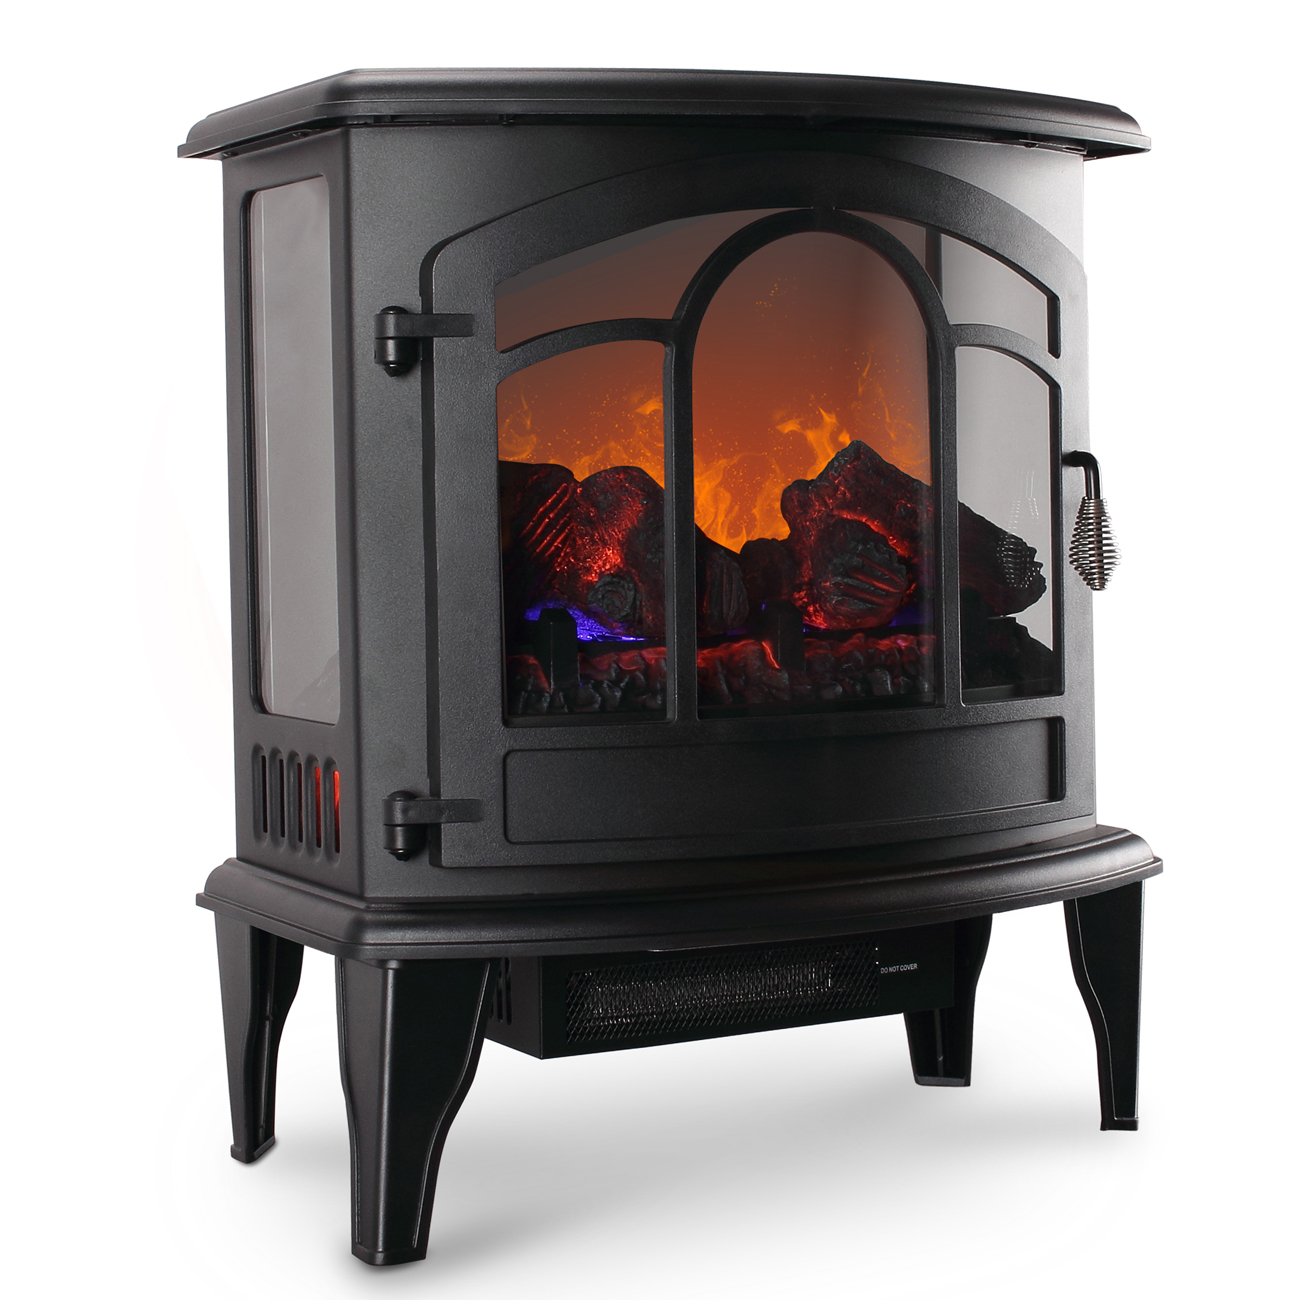 Oyria 1500W Portable Electric Fireplace Stove Freestanding Electric Fireplace Fire Wood Log Burning Effect Flame Vintage Heater Stove Living Room Tempered Glass View 